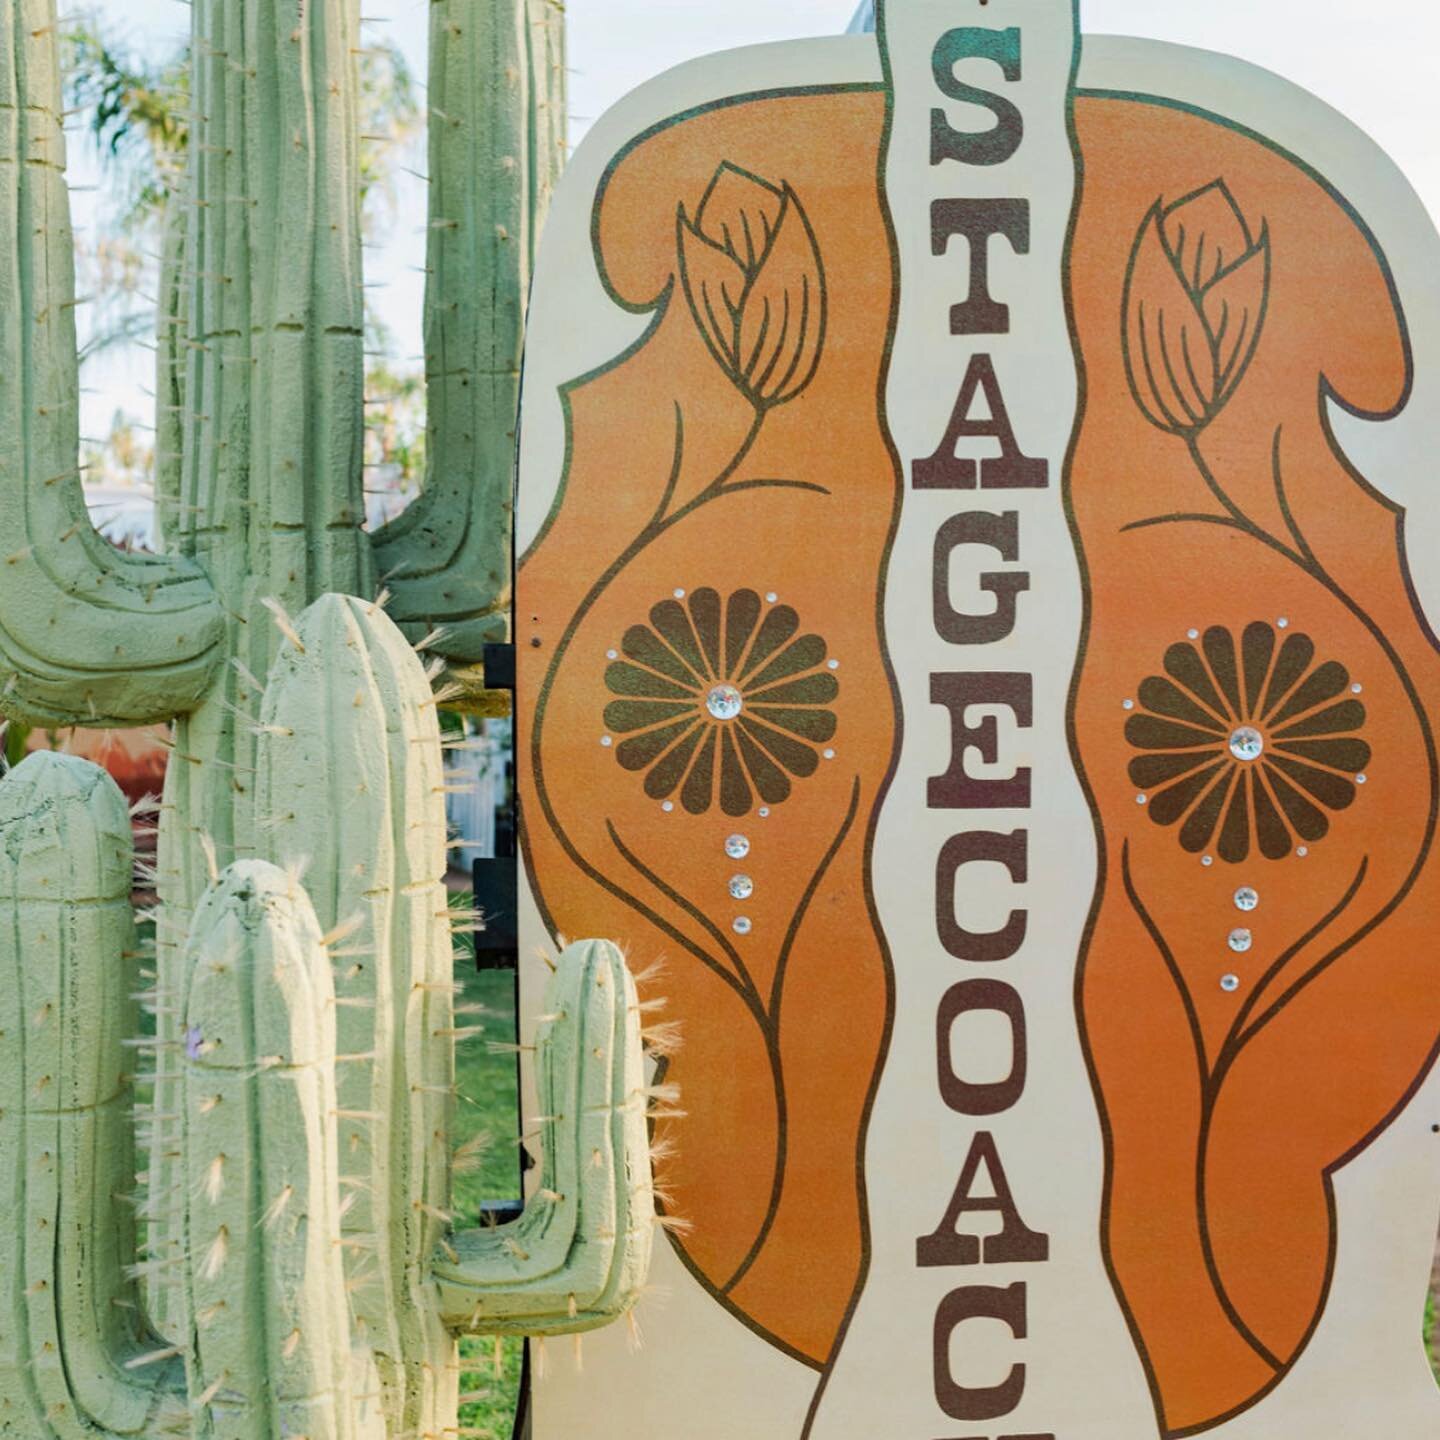 tinker tin design + build | artist compound, rhinestone saloon, cowboy saloon, honky tonk &amp; more for our @stagecoach family!! 🐎
.
all the cactus pricks are made out of horsehair (which might be our favorite part). more installation pics to come!